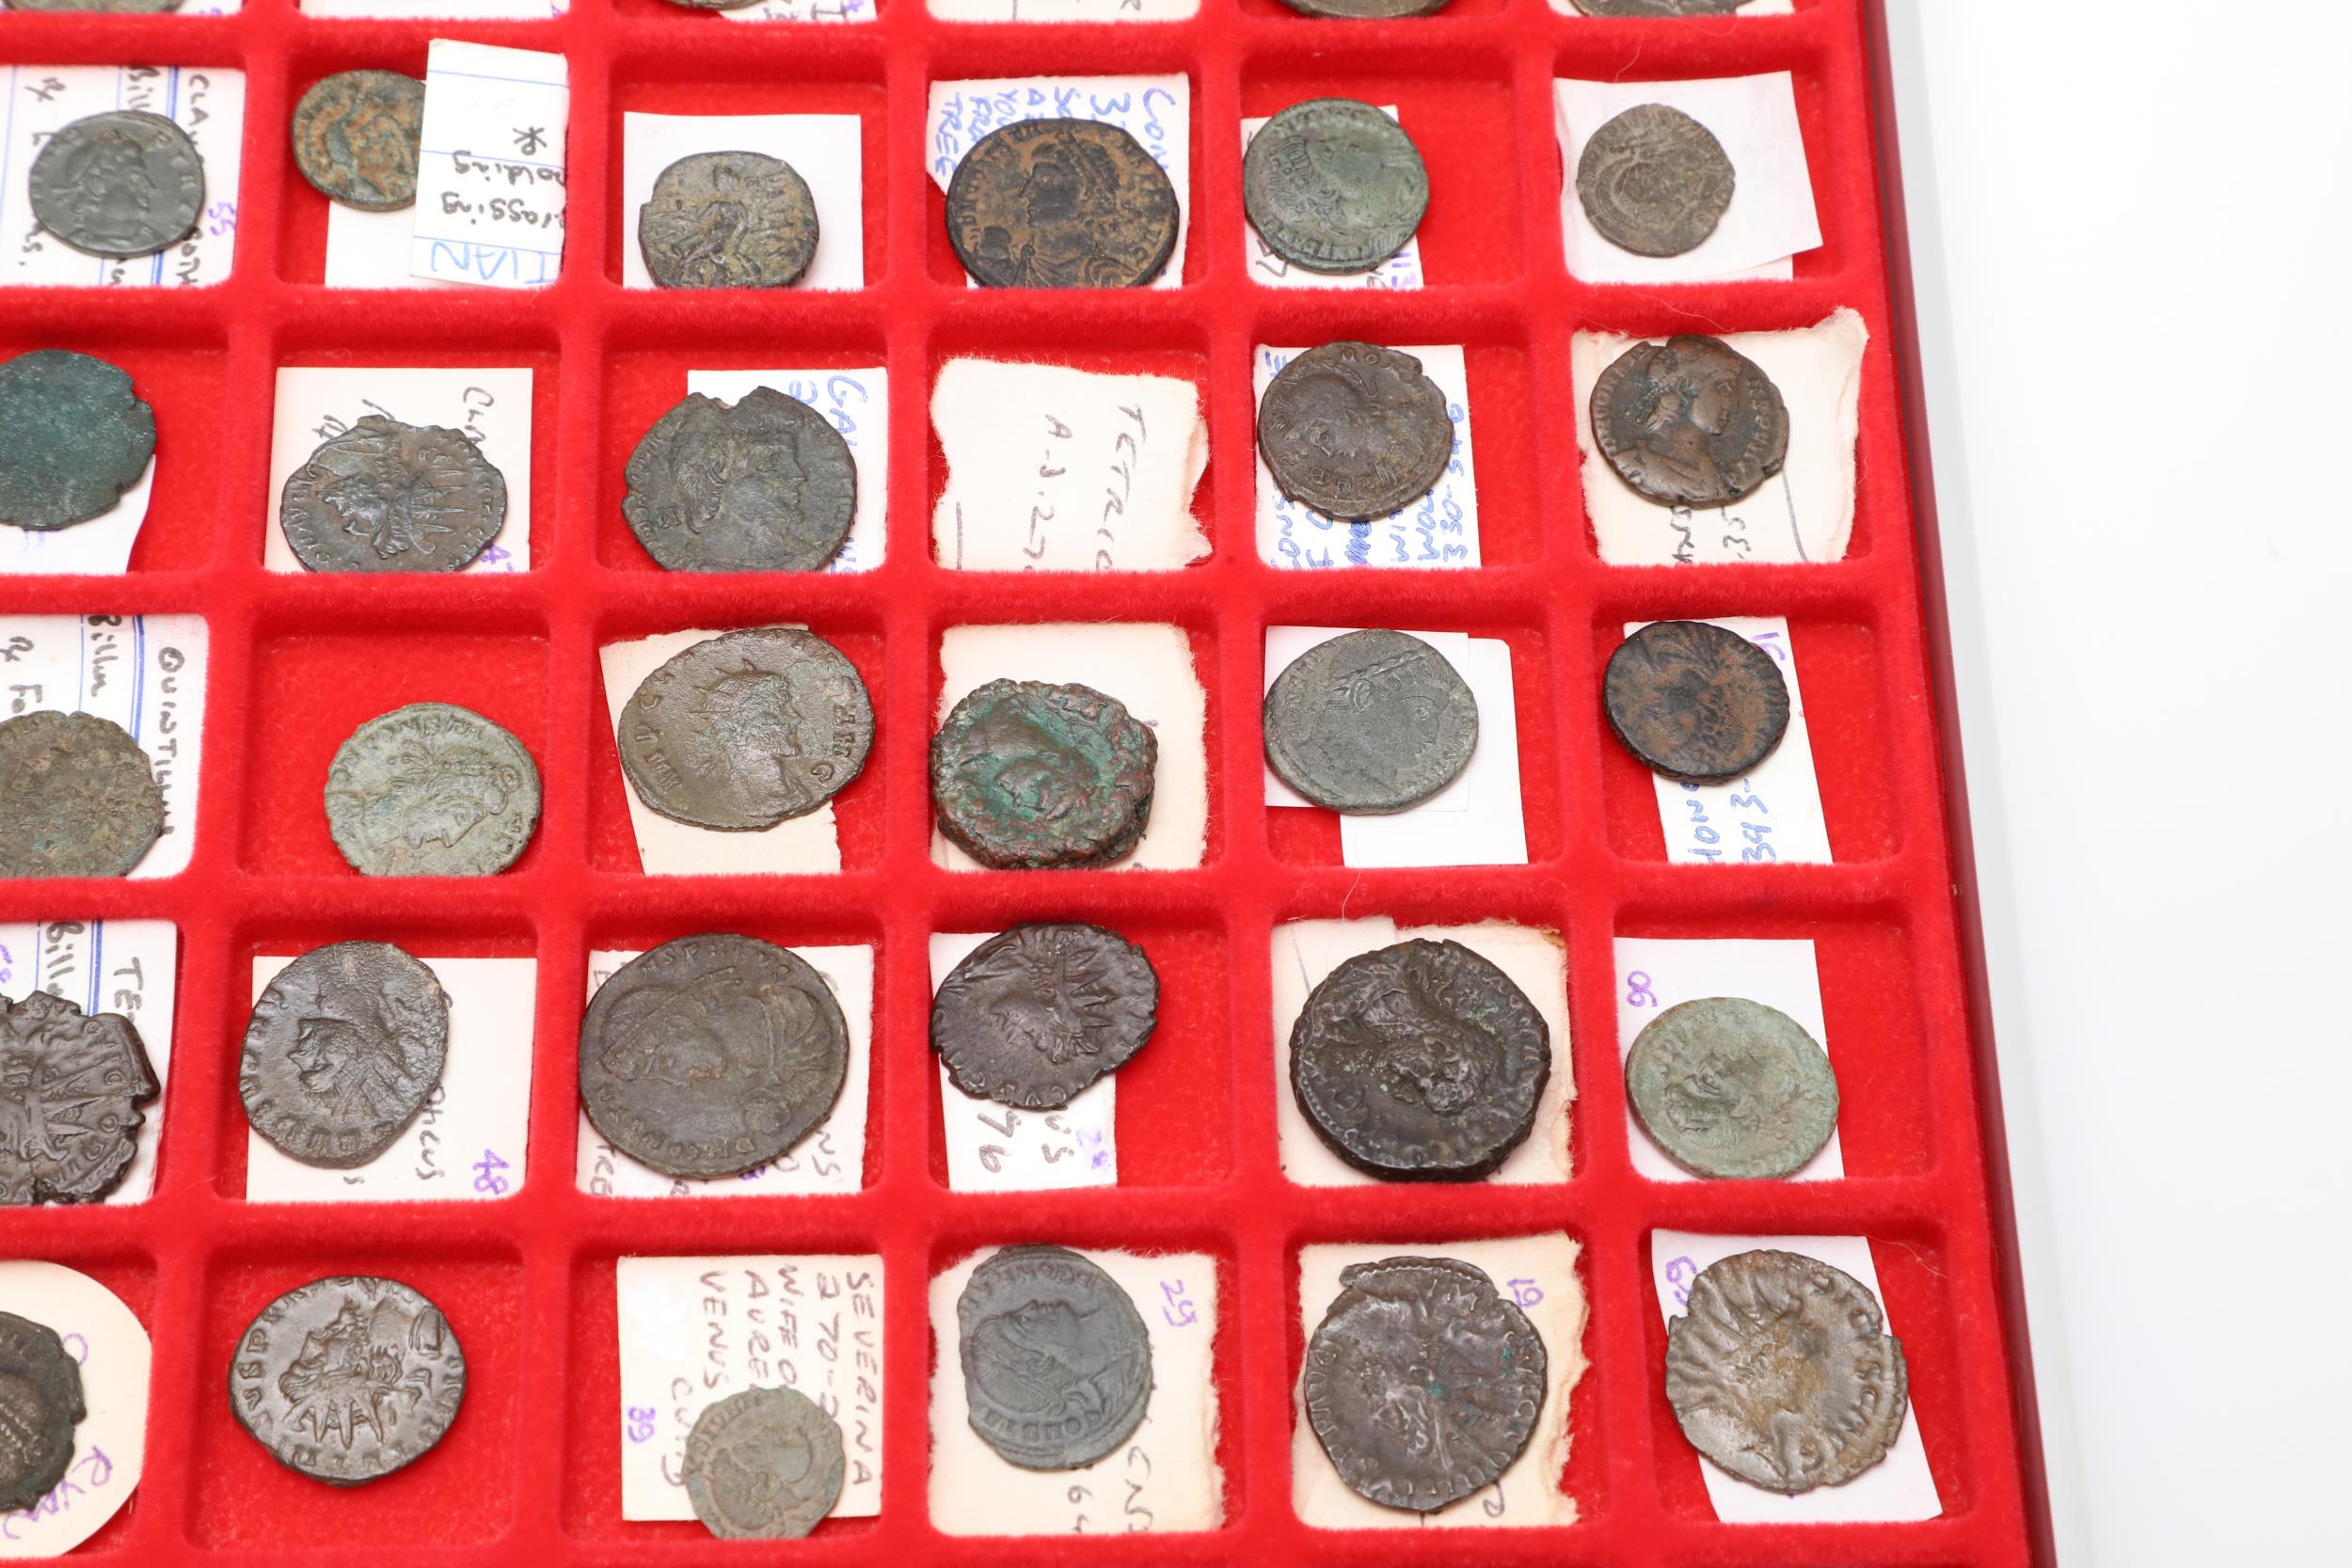 A COLLECTION OF ROMAN COINS IN A LINDNER COIN TRAY. - Image 9 of 11